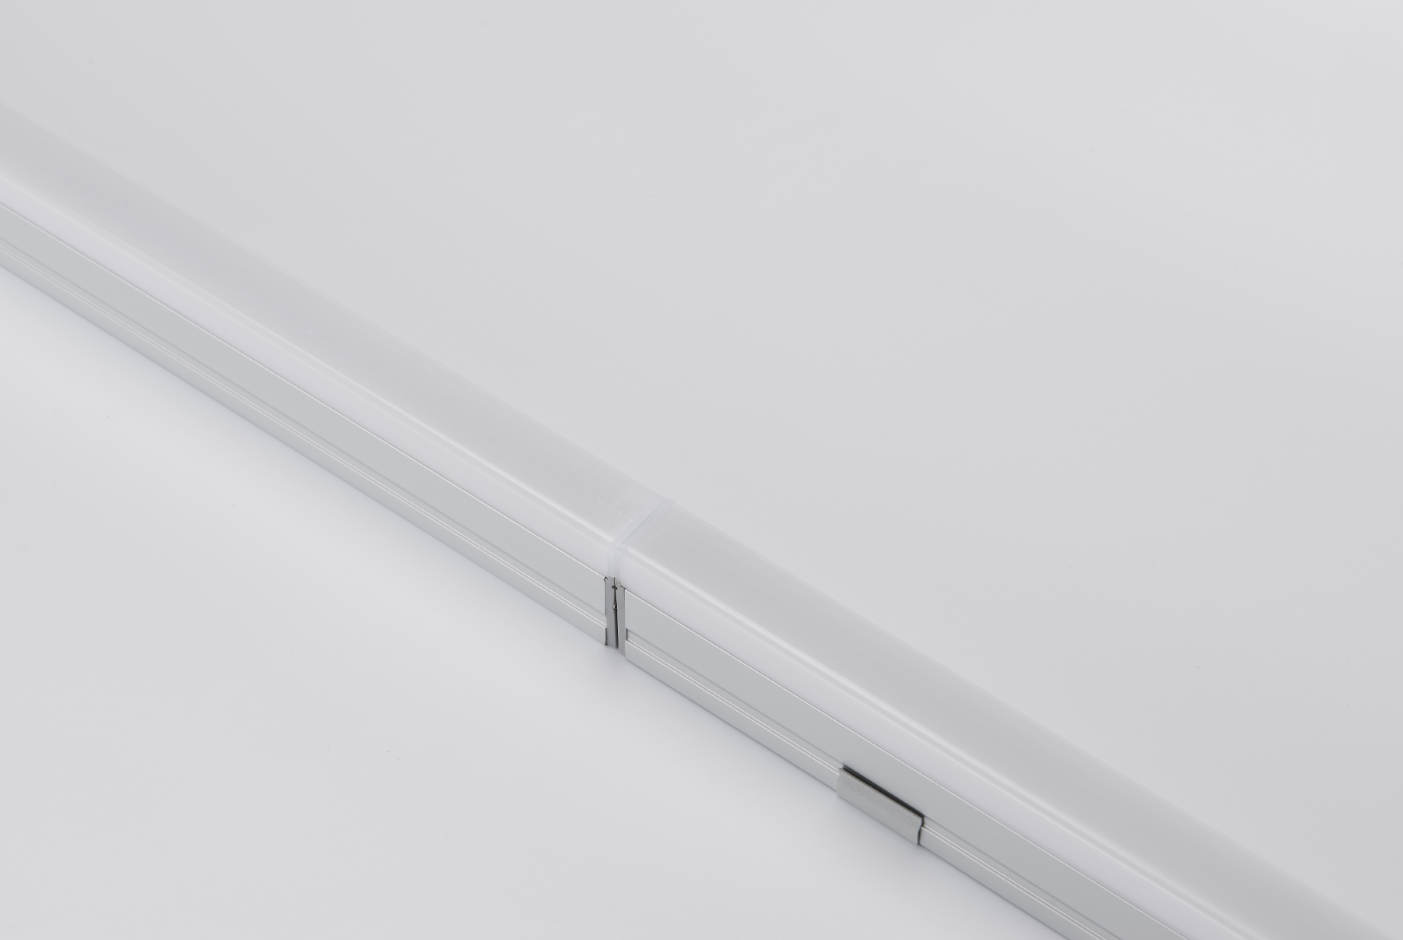 RH-C26 High Quality Ip65 Waterproof Recessed Mounted Outdoor Led Linear Light